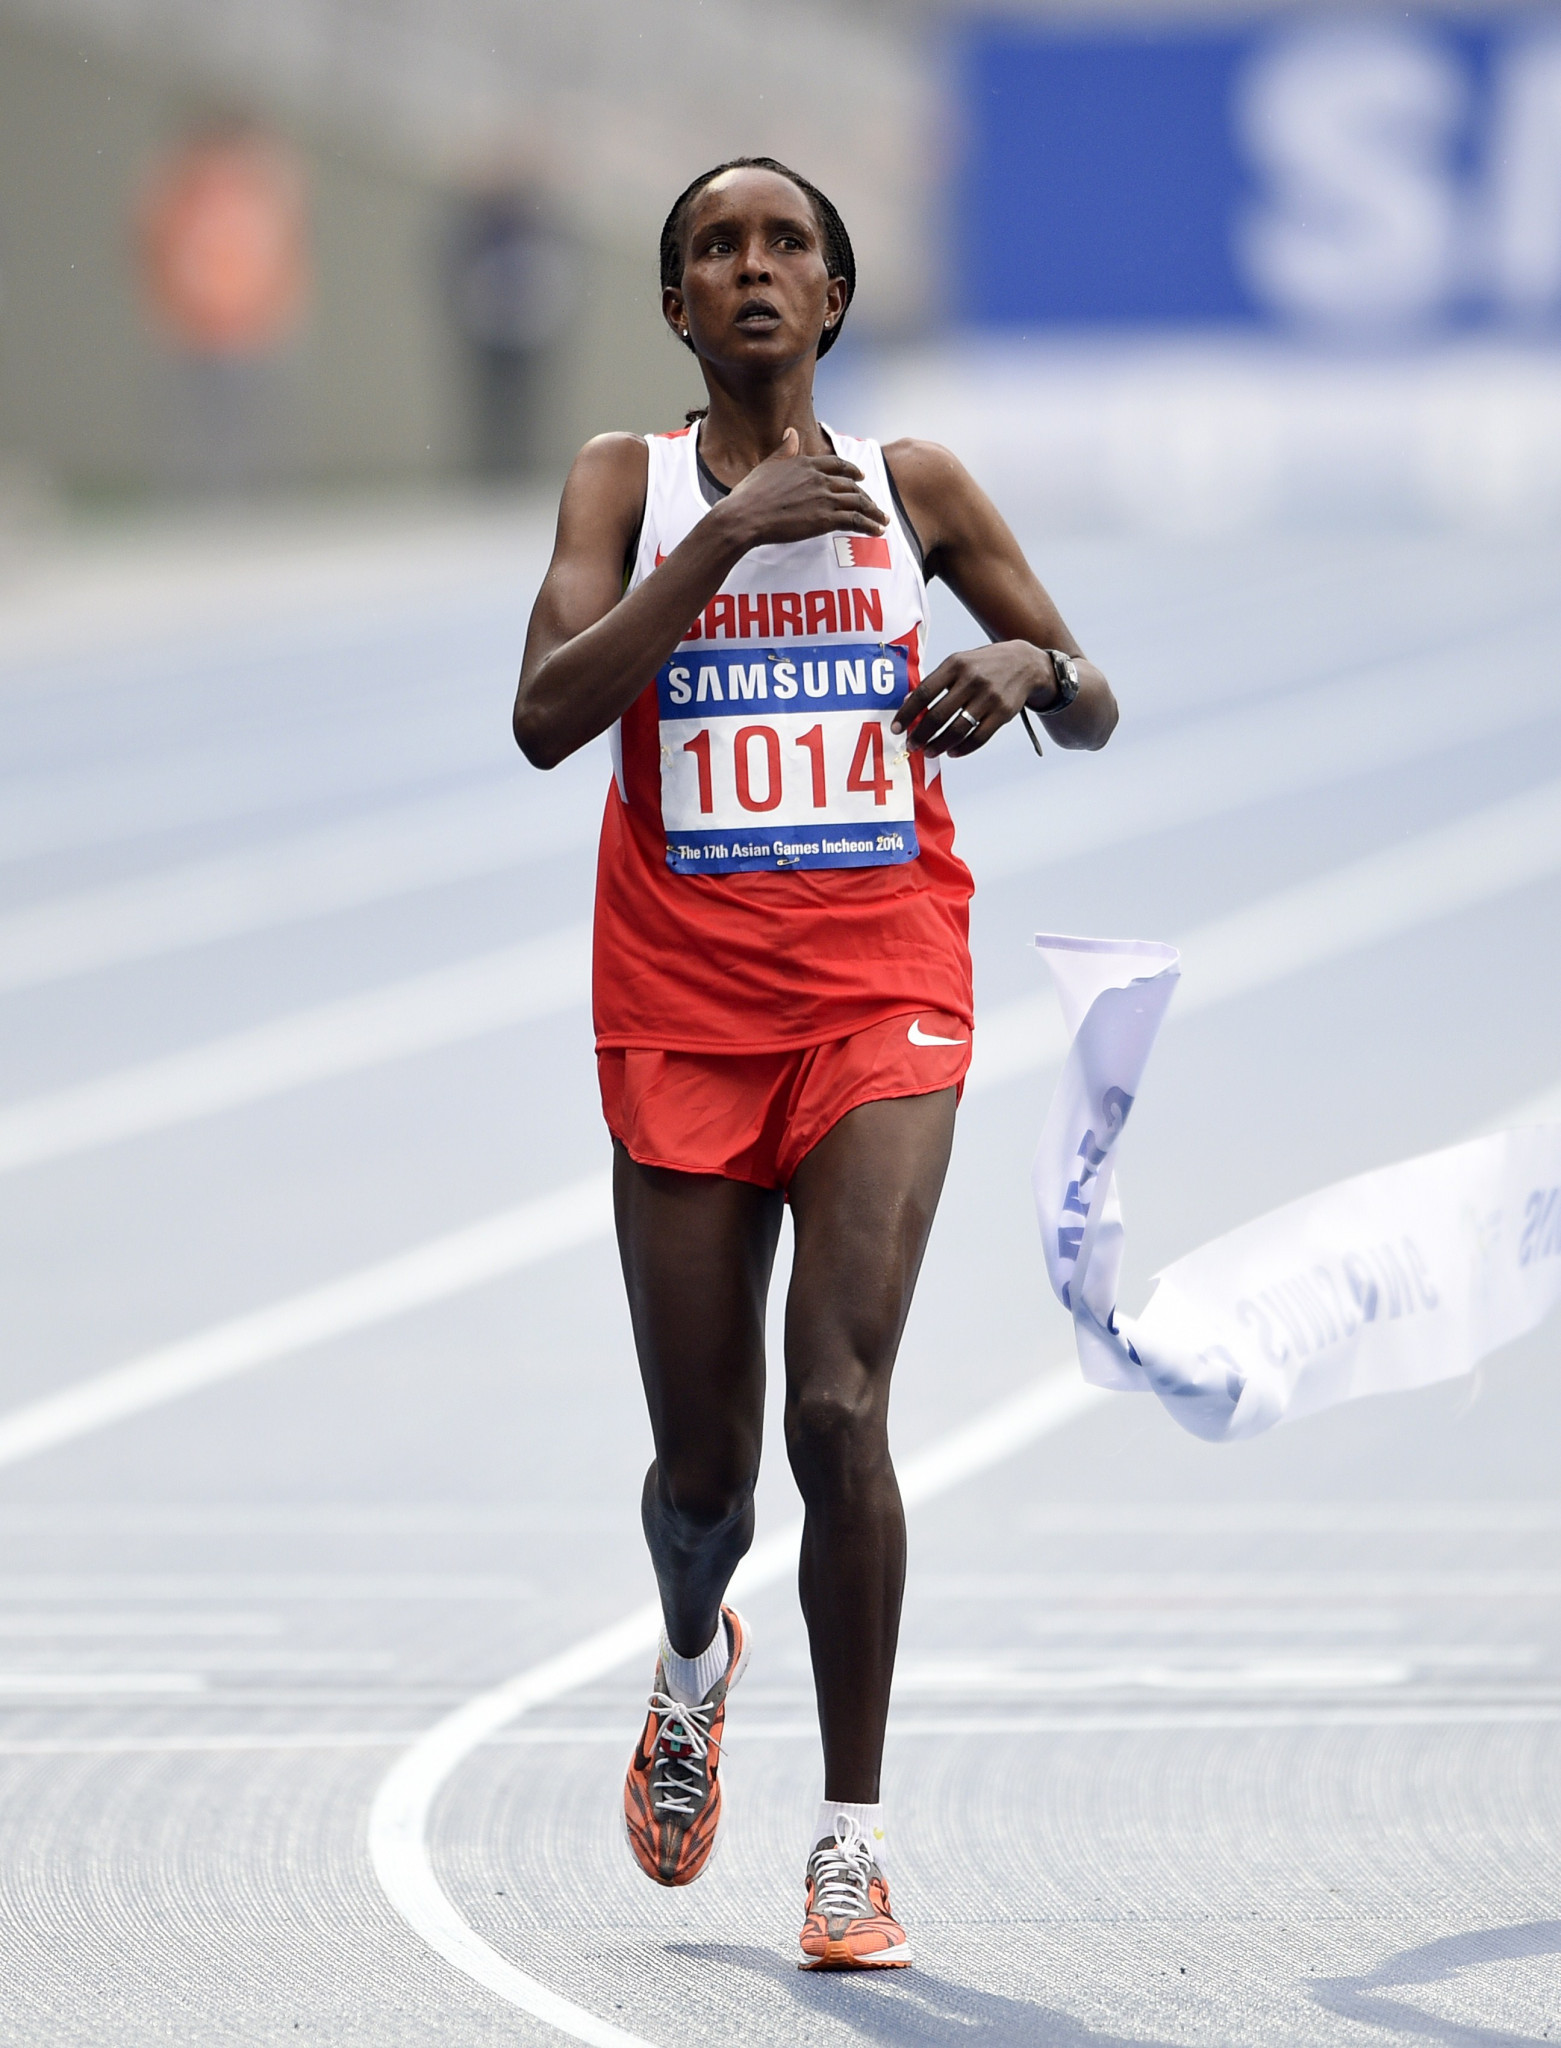 Eunice Kirwa won the gold medal in the marathon at the 2014 Asian Games in Incheon shortly after switching her allegiance from Kenya to Bahrain ©Getty Images